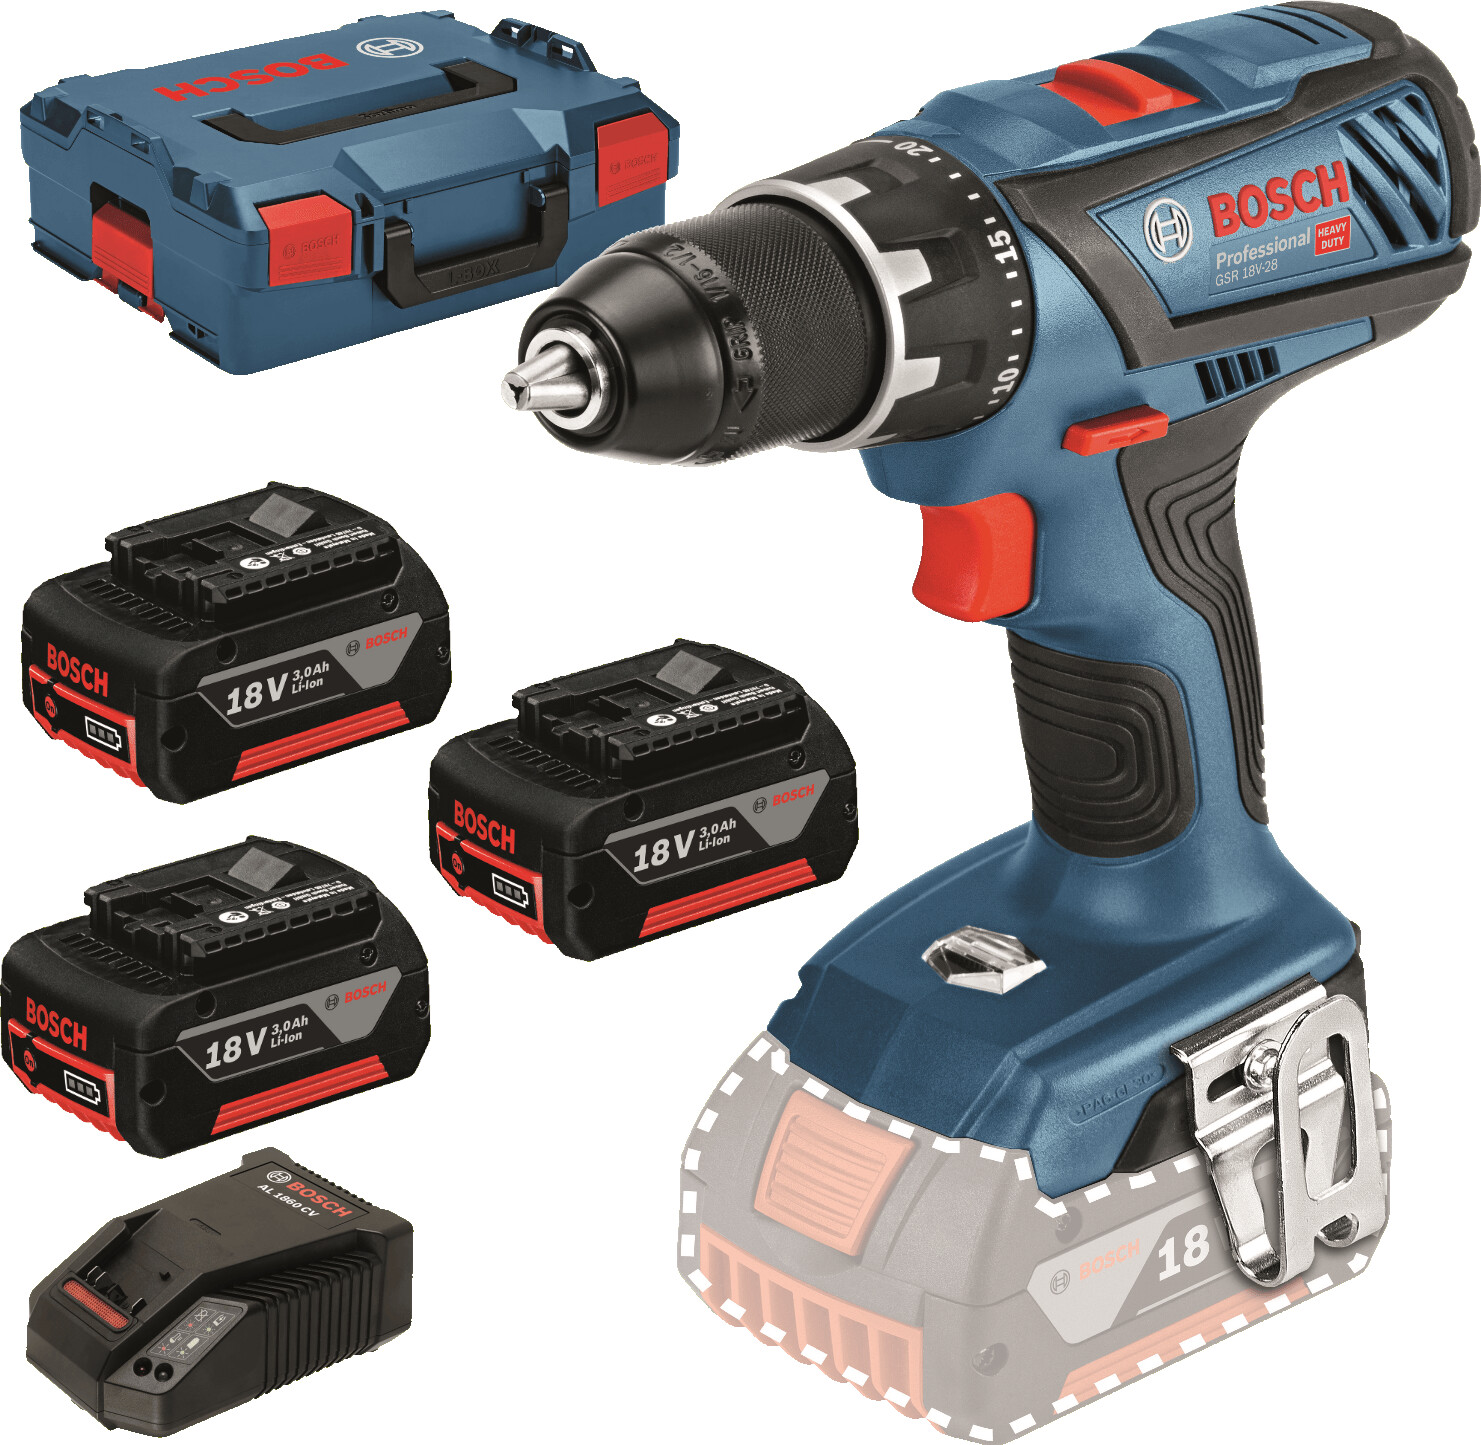 Buy Bosch GSR 18V-28 Professional from £81.55 (Today) – Best Deals on